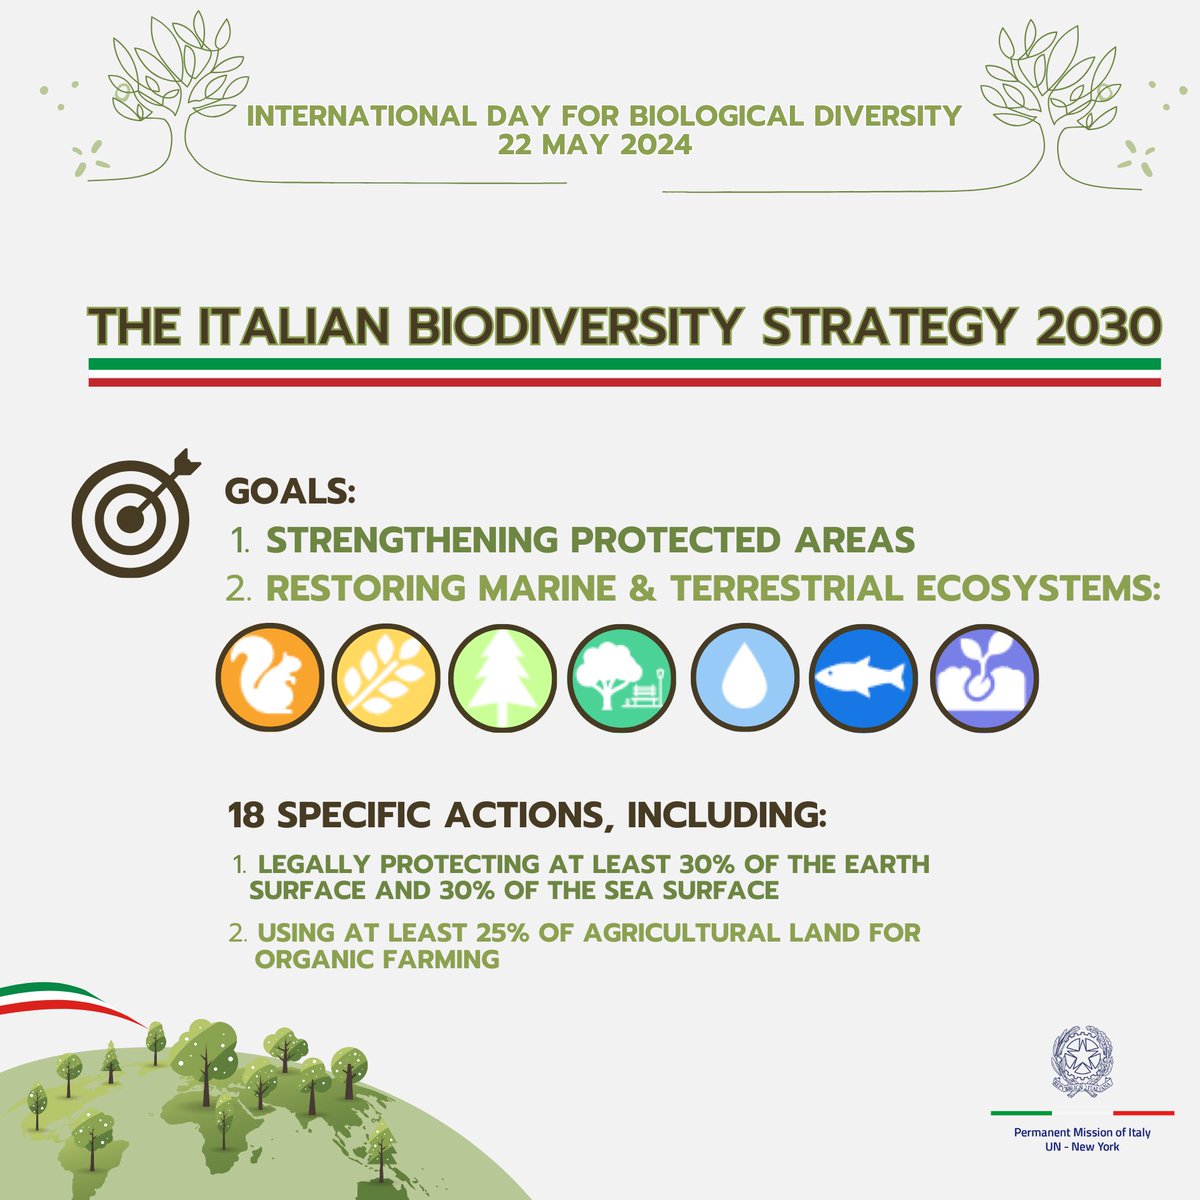 On #BiodiversityDay🌱 & every day Italy is #PartOfThePlan! The 🇮🇹 National Strategy for Biodiversity 2030 is rooted on the UN Convention on Biological Diversity. Learn more👇on our action to implement #BiodiversityPlan